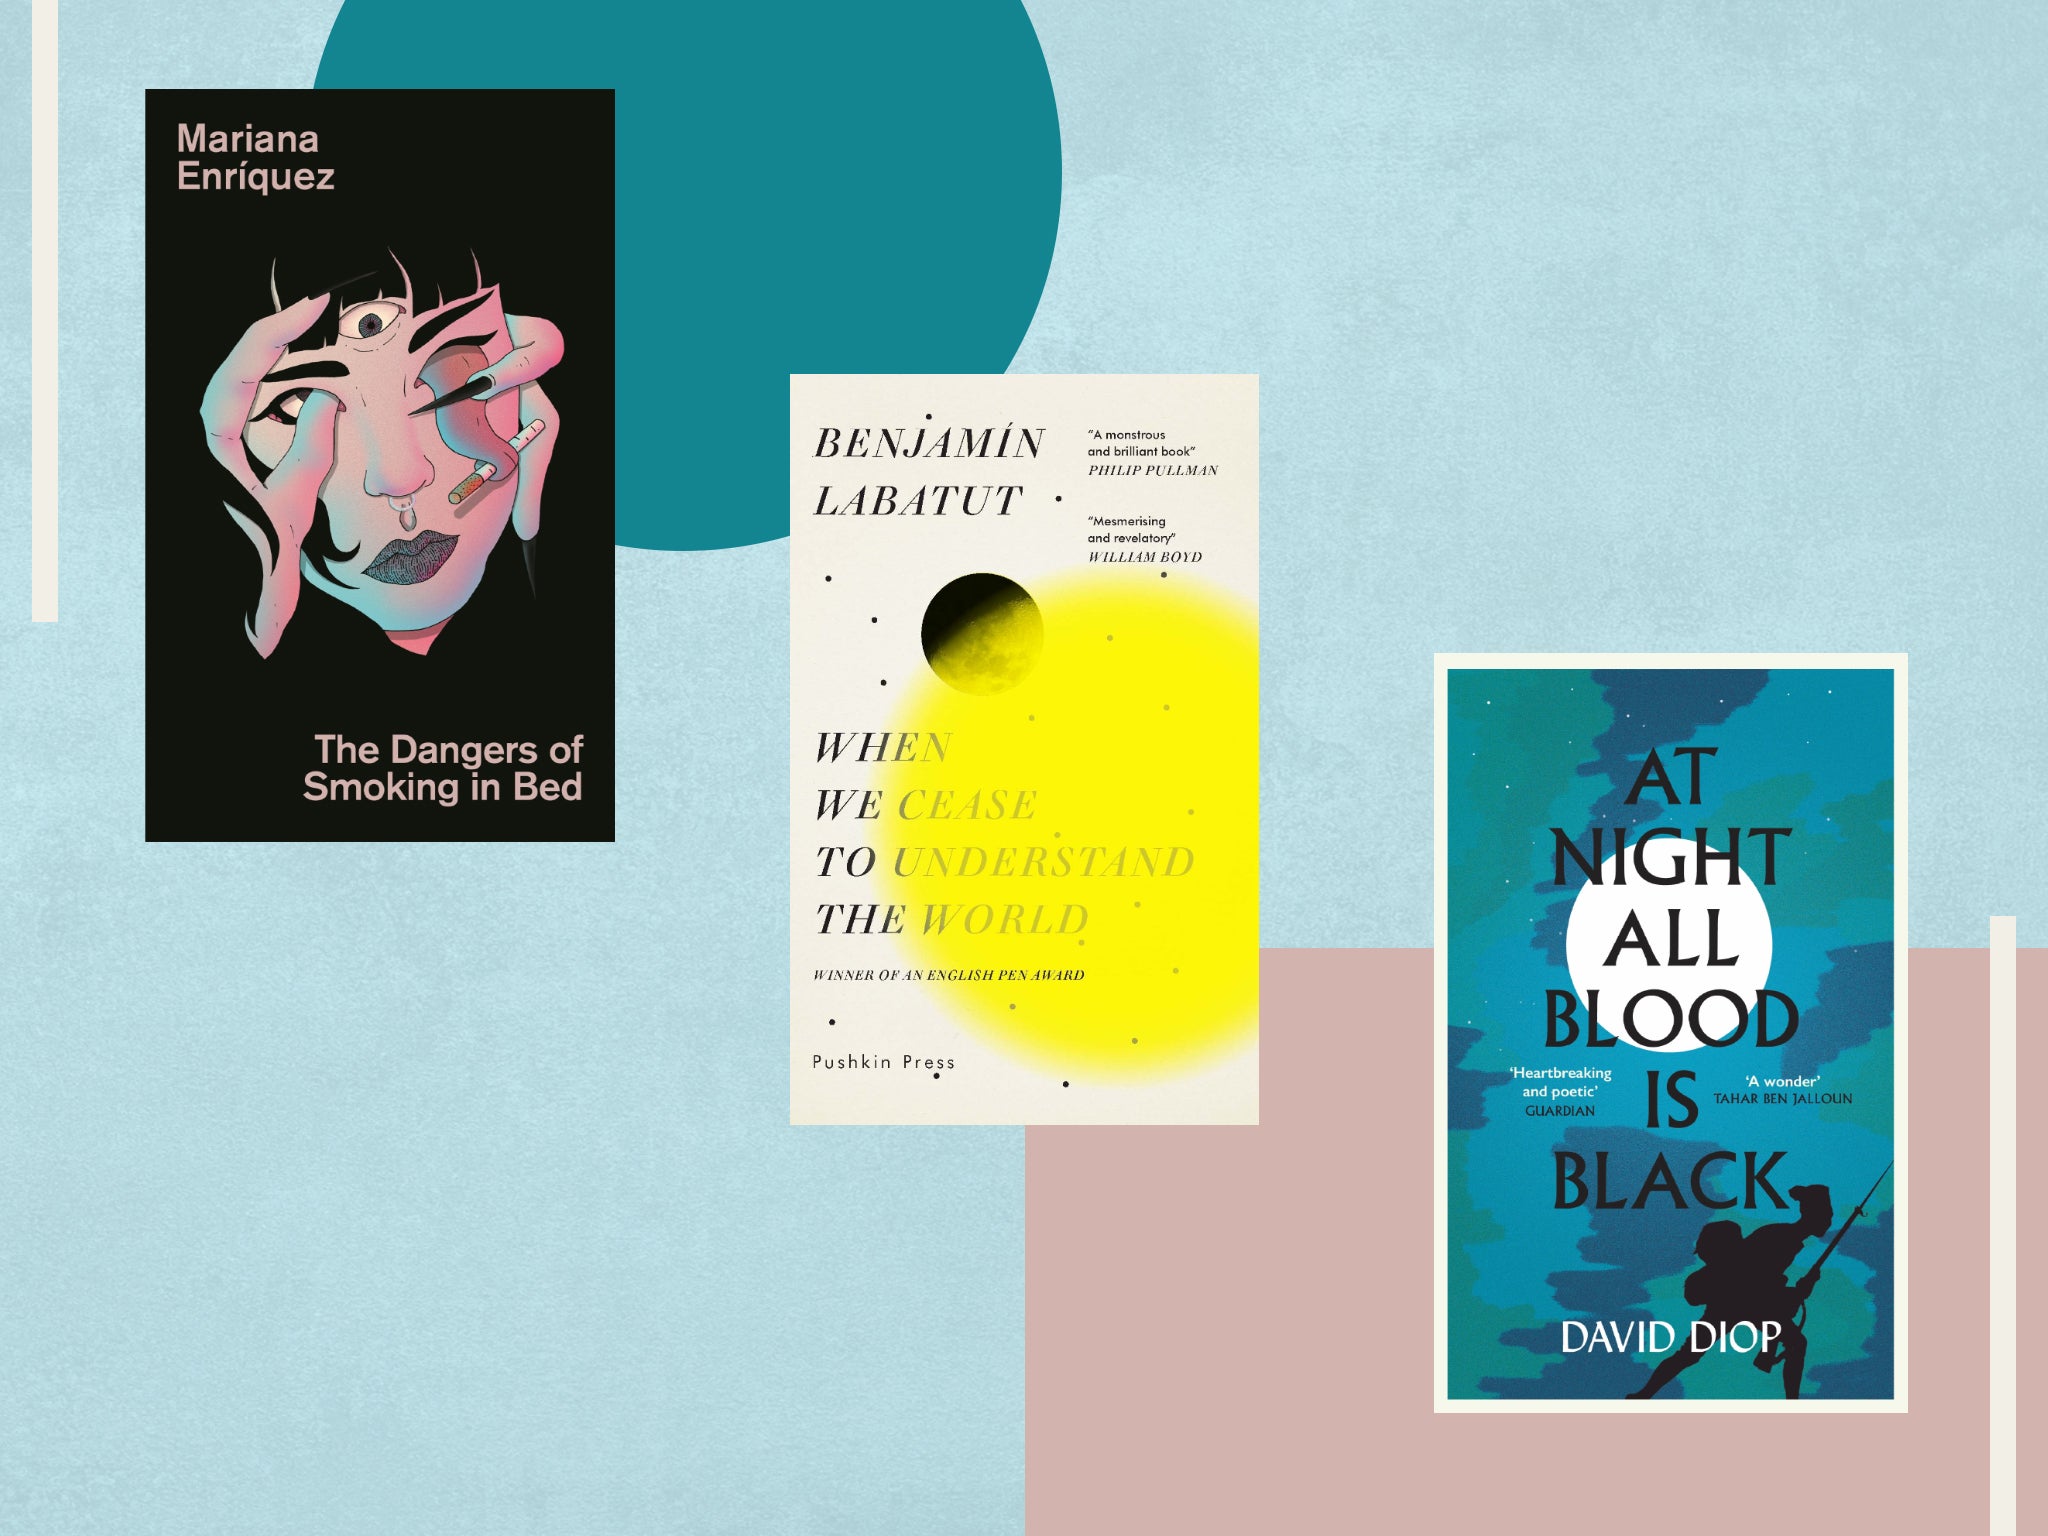 Discover some of the most exciting emerging literary voices